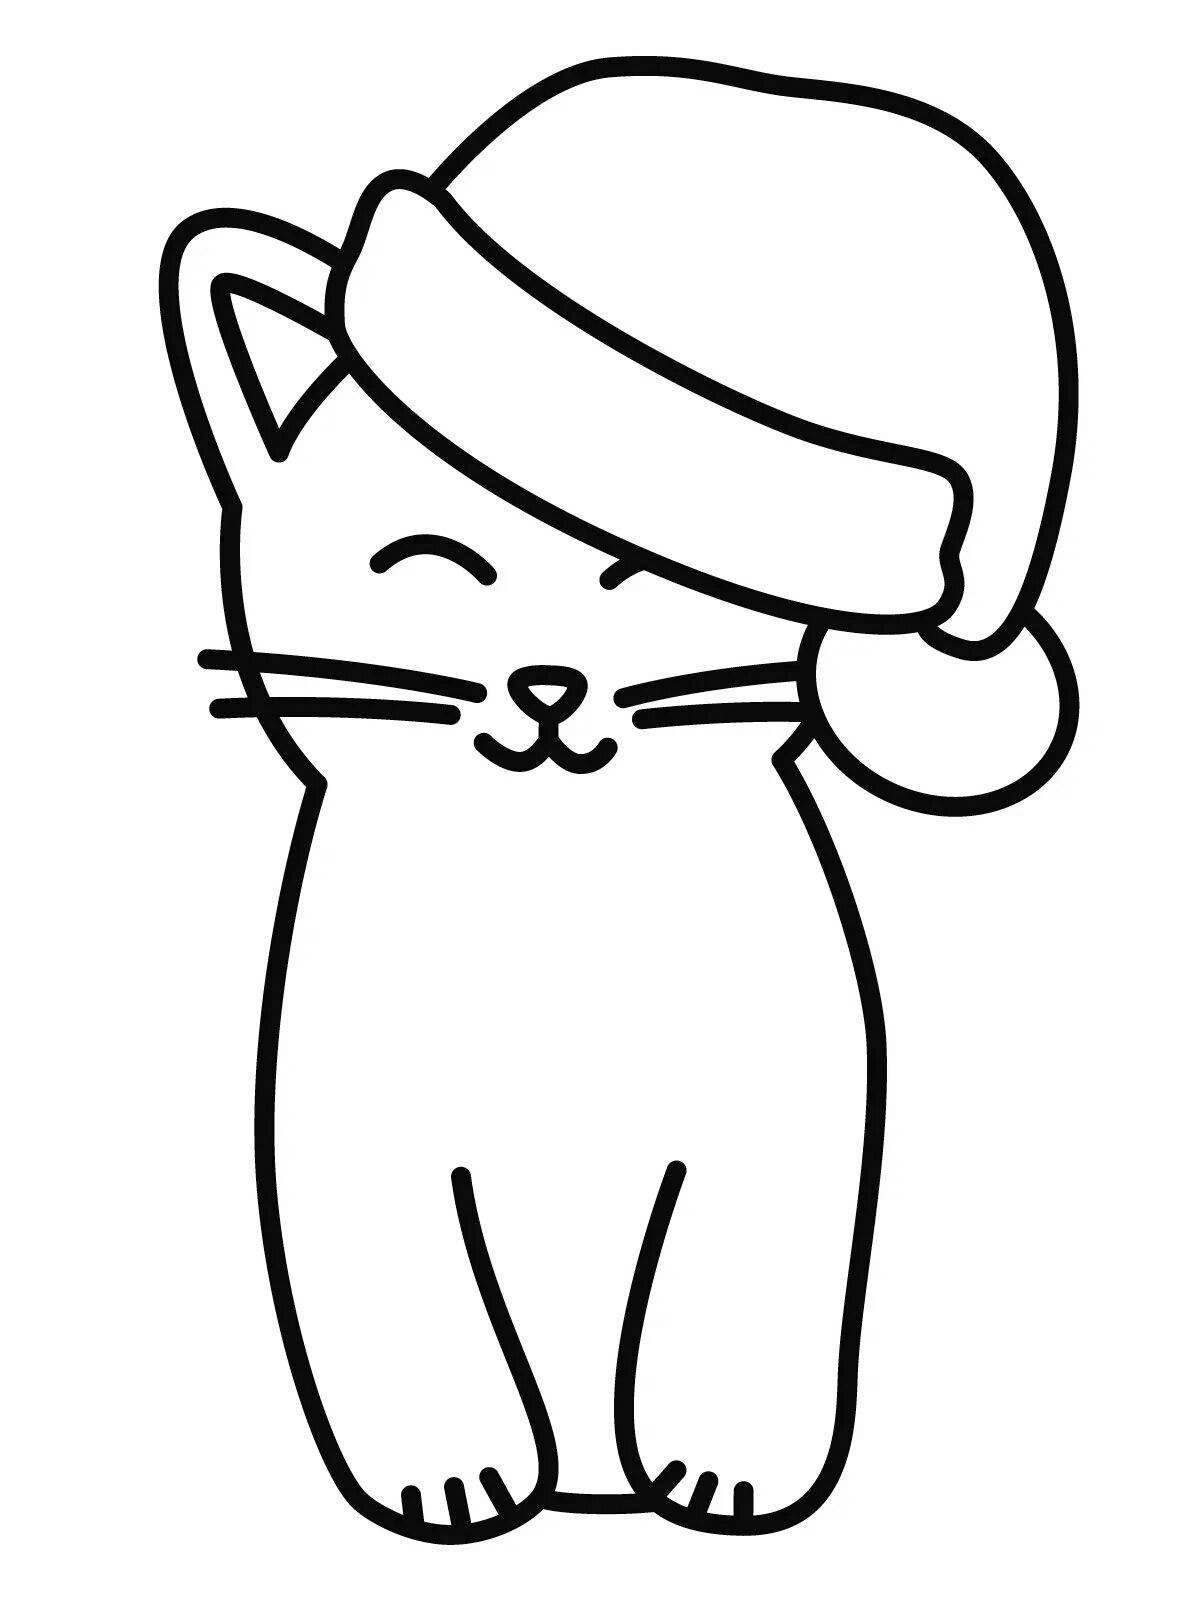 Coloring page happy christmas kittens